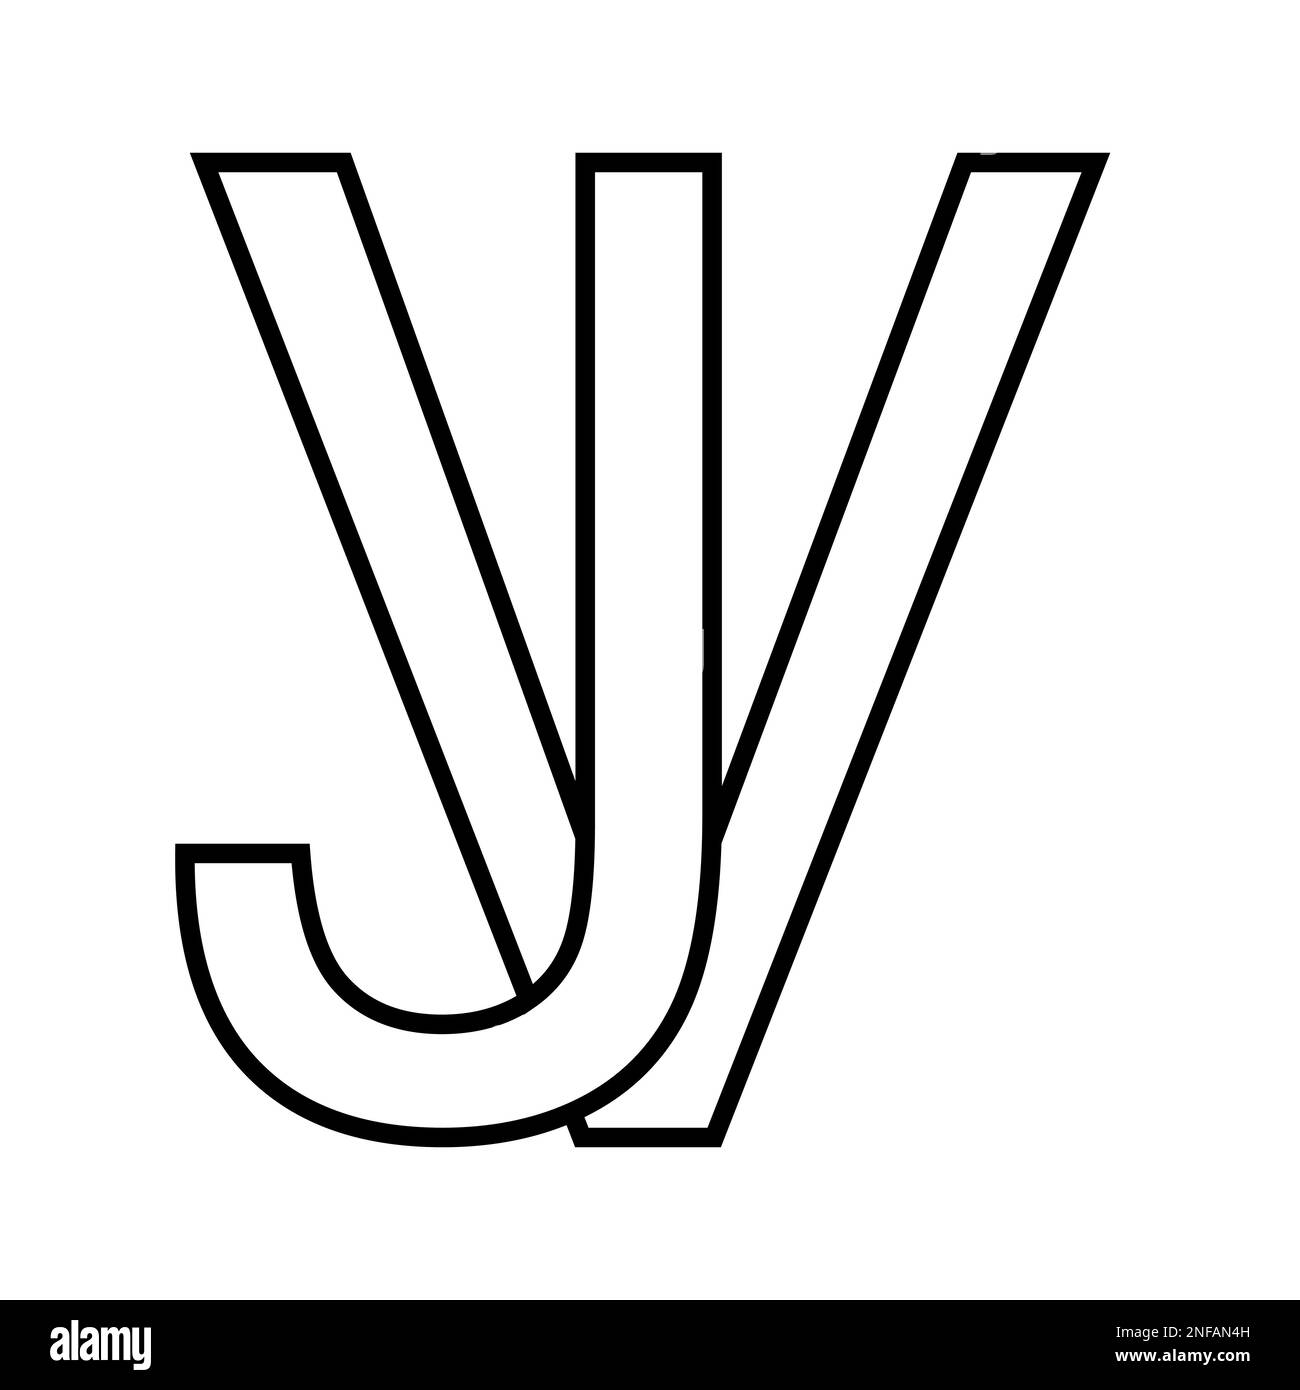 Vl initials logo Black and White Stock Photos & Images - Alamy